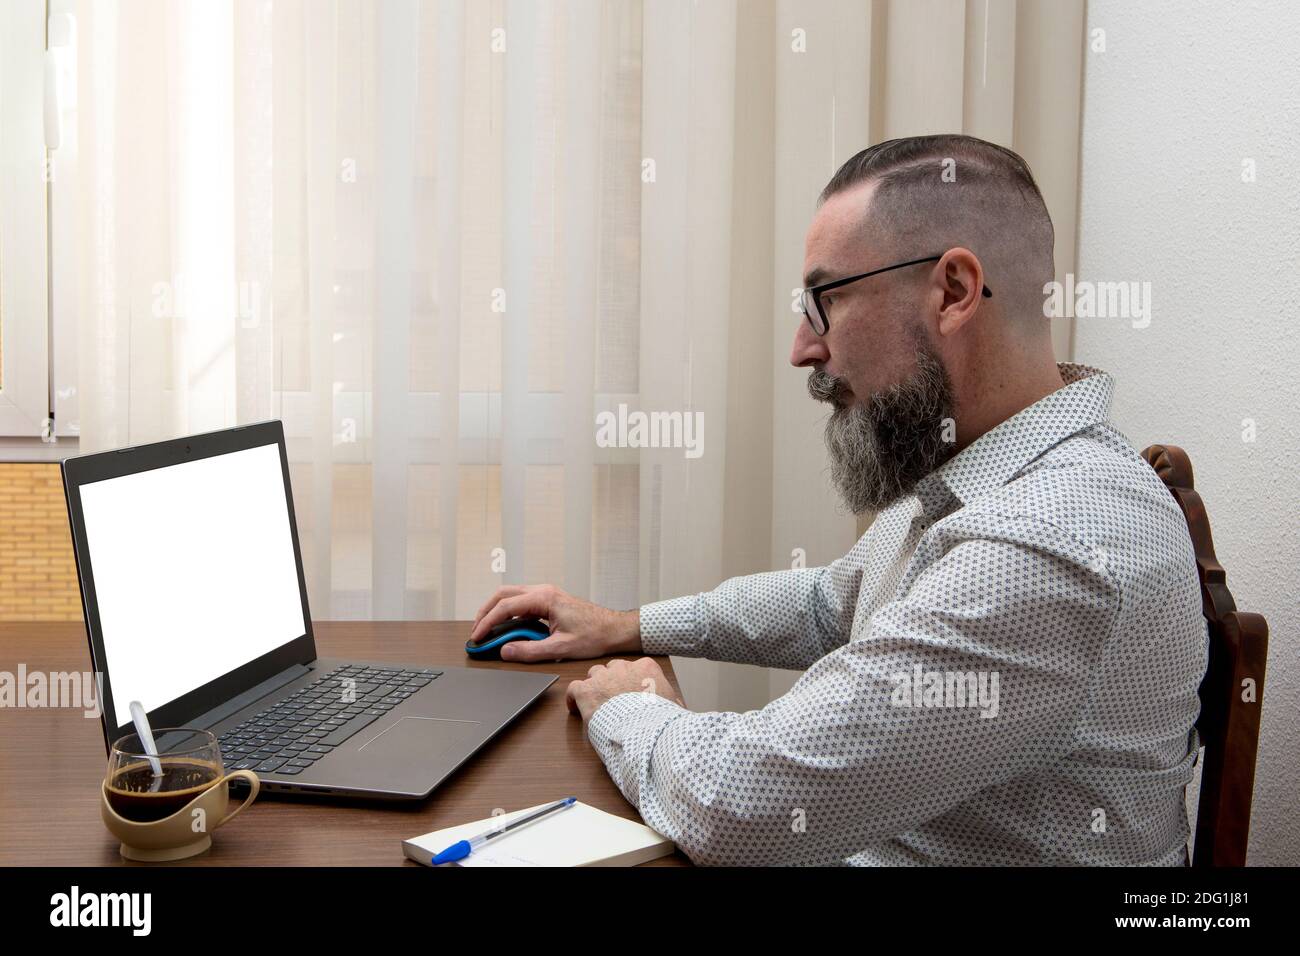 hipster with glasses working remotely with laptop at home using wireless mouse and wi-fi network Stock Photo